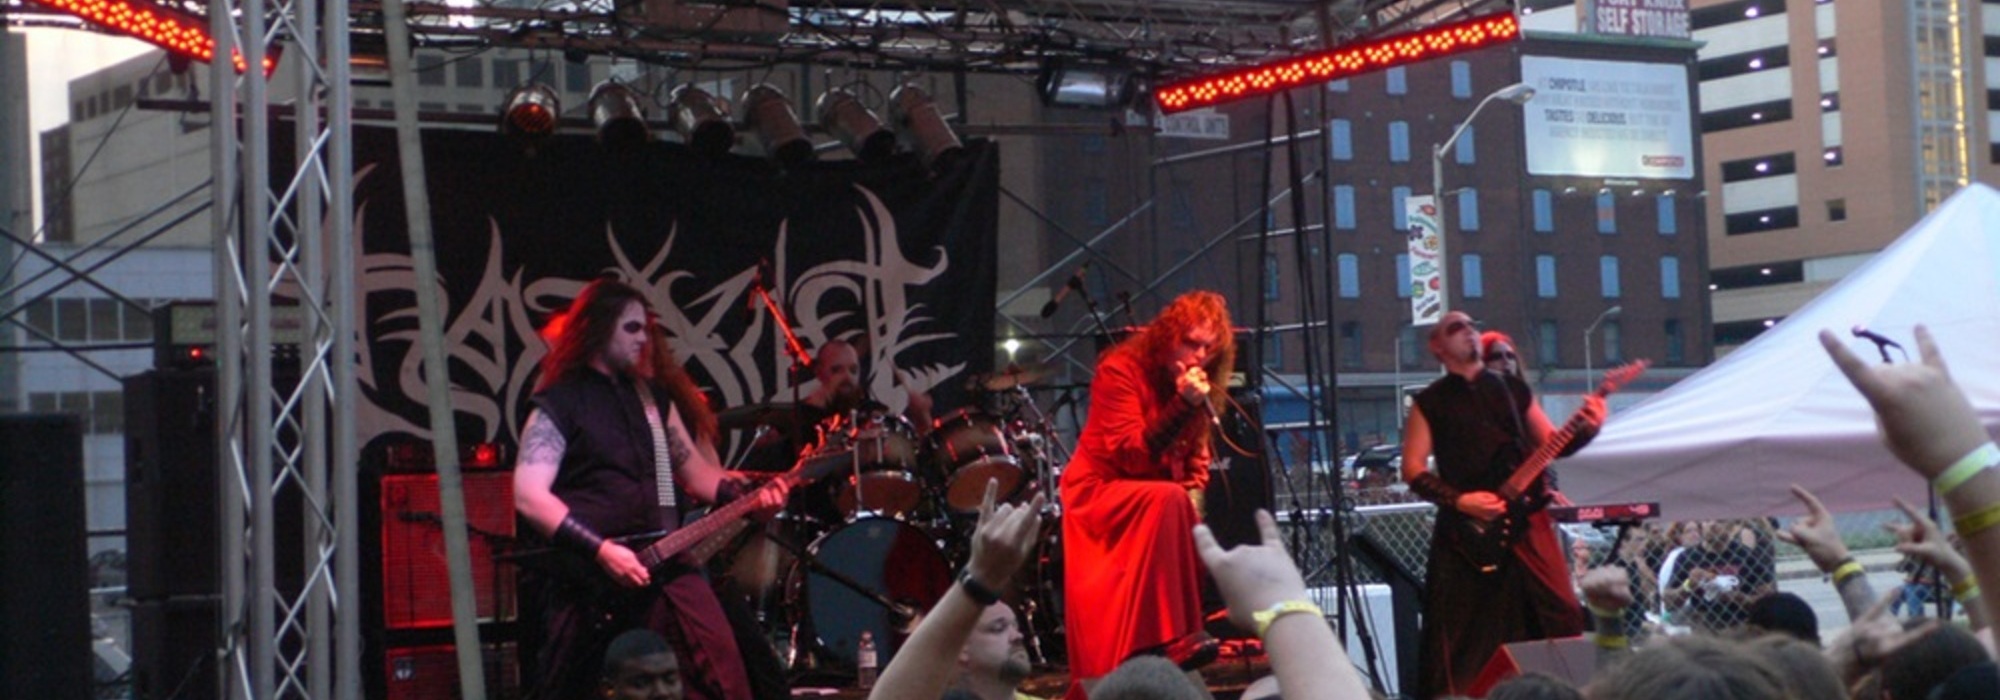 A Maryland Deathfest live event